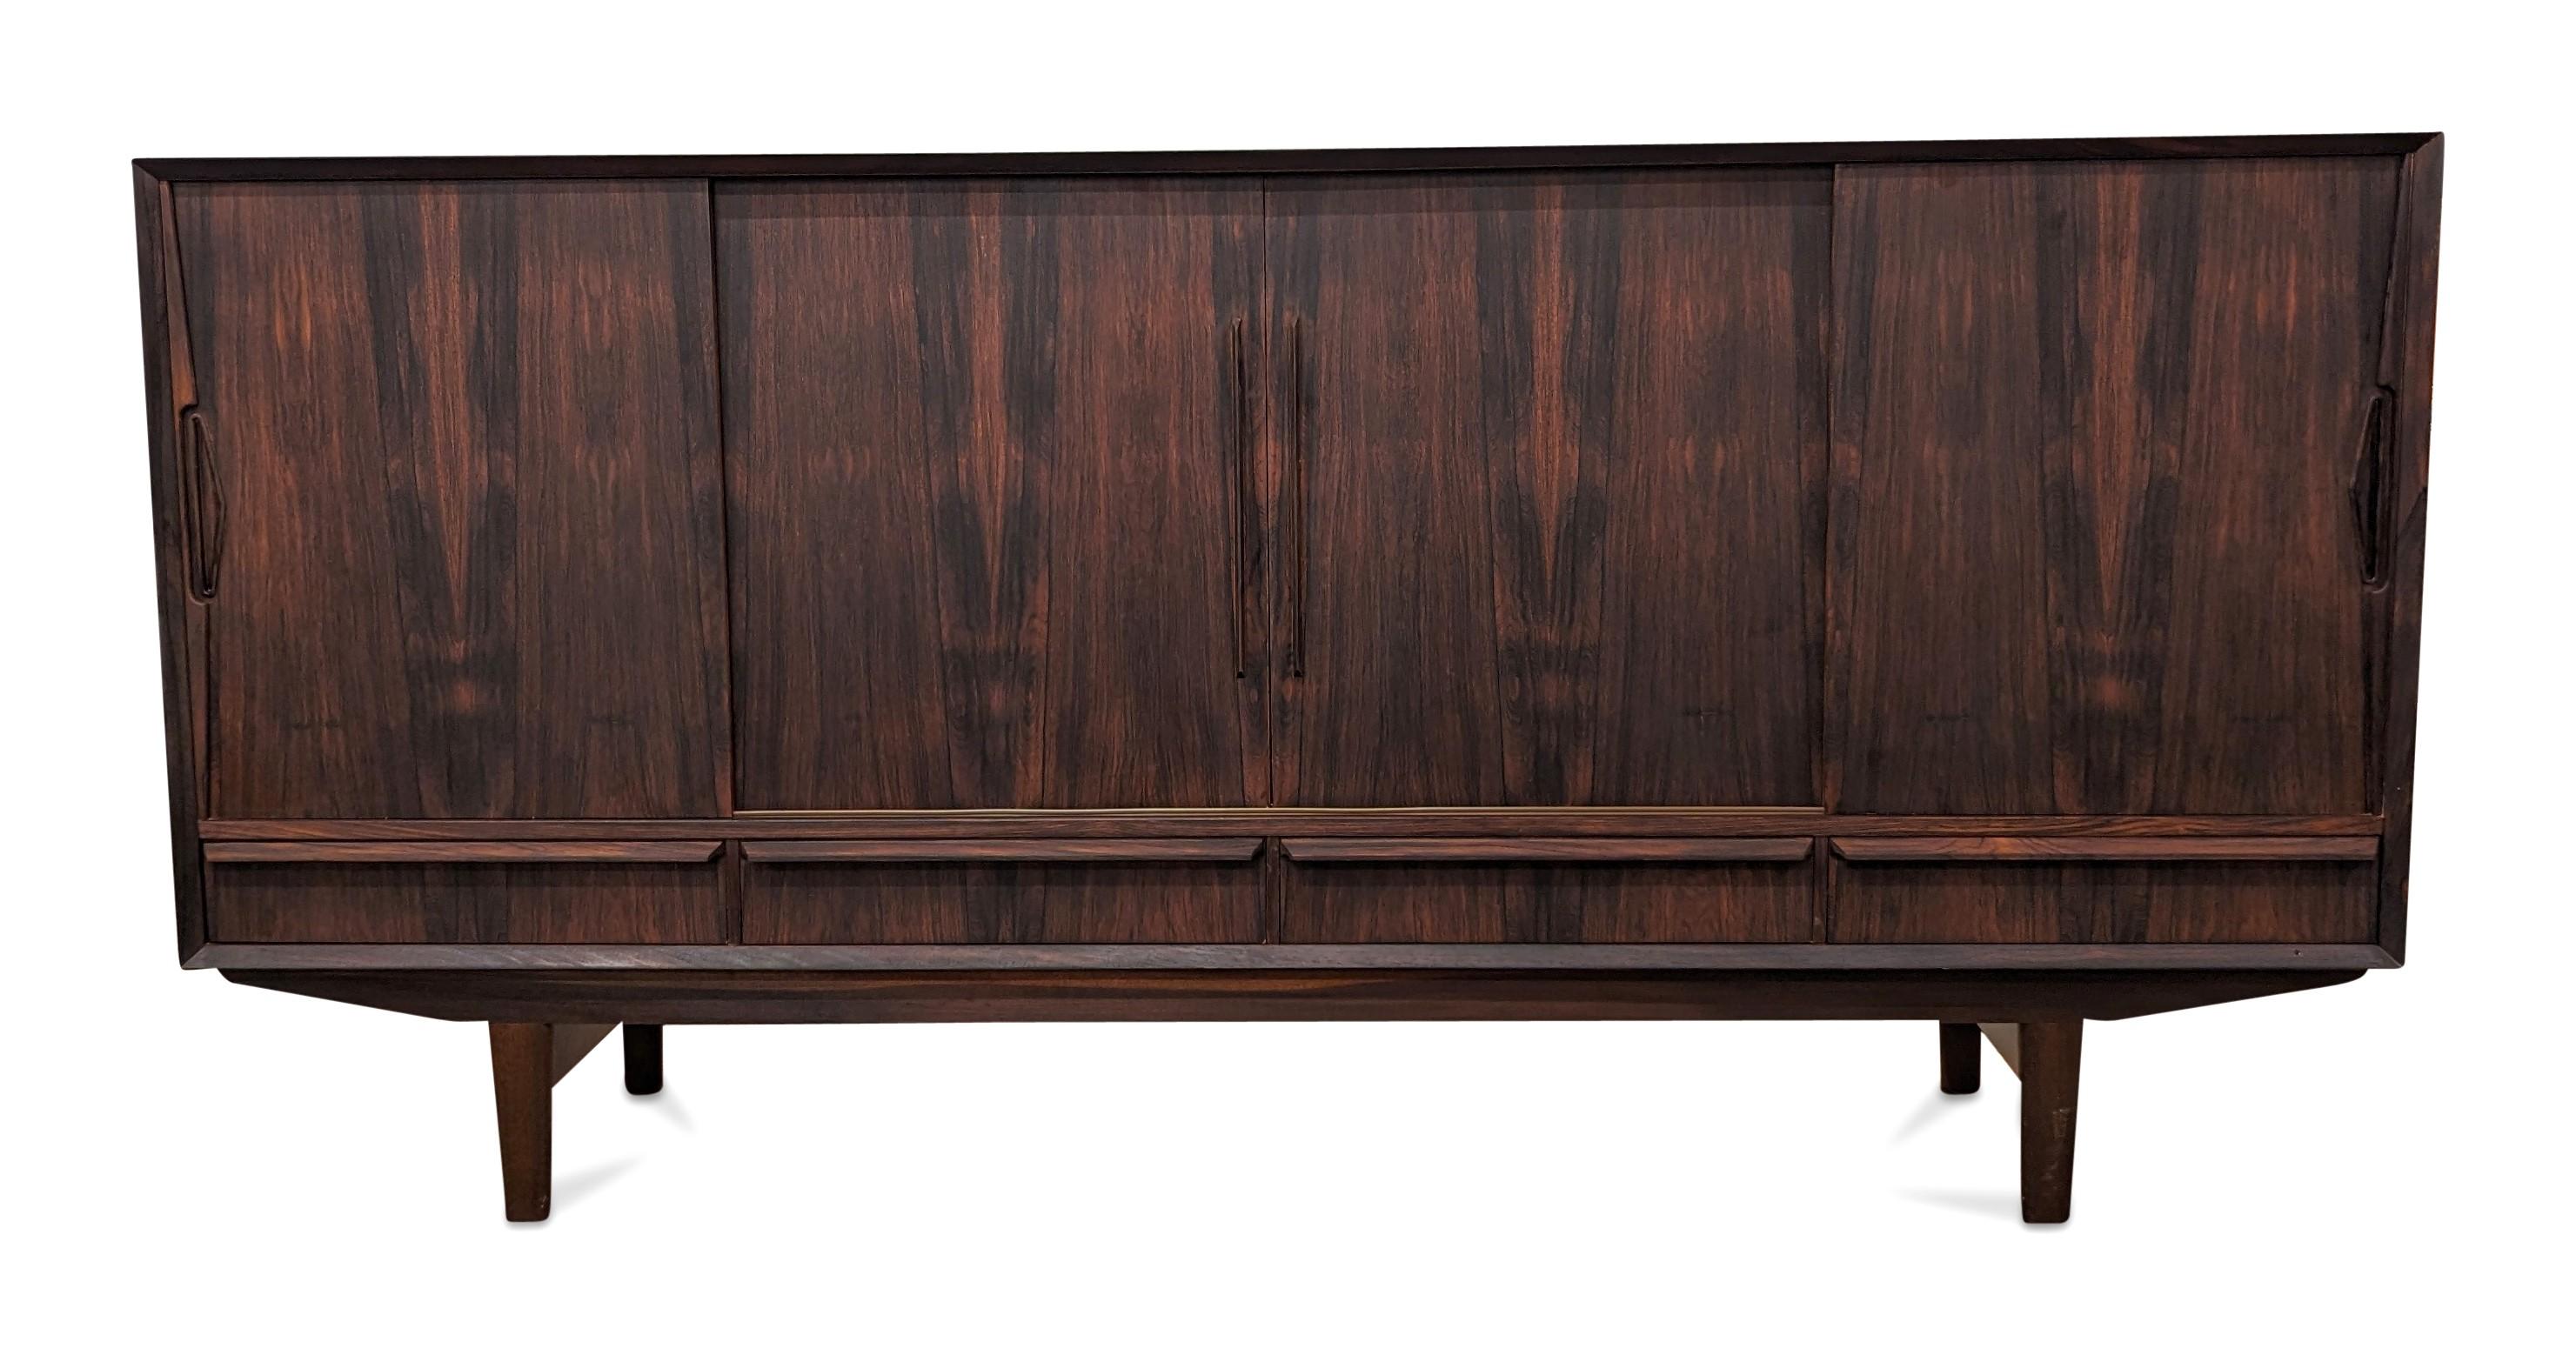 Vintage Danish mid-century modern, made in the 1950's - Recently refurbished

The piece is more than 65+ years old and some wear and tear can be expected, but we do everything we can to refurbish them in respect to the design.

Brazilian rosewood